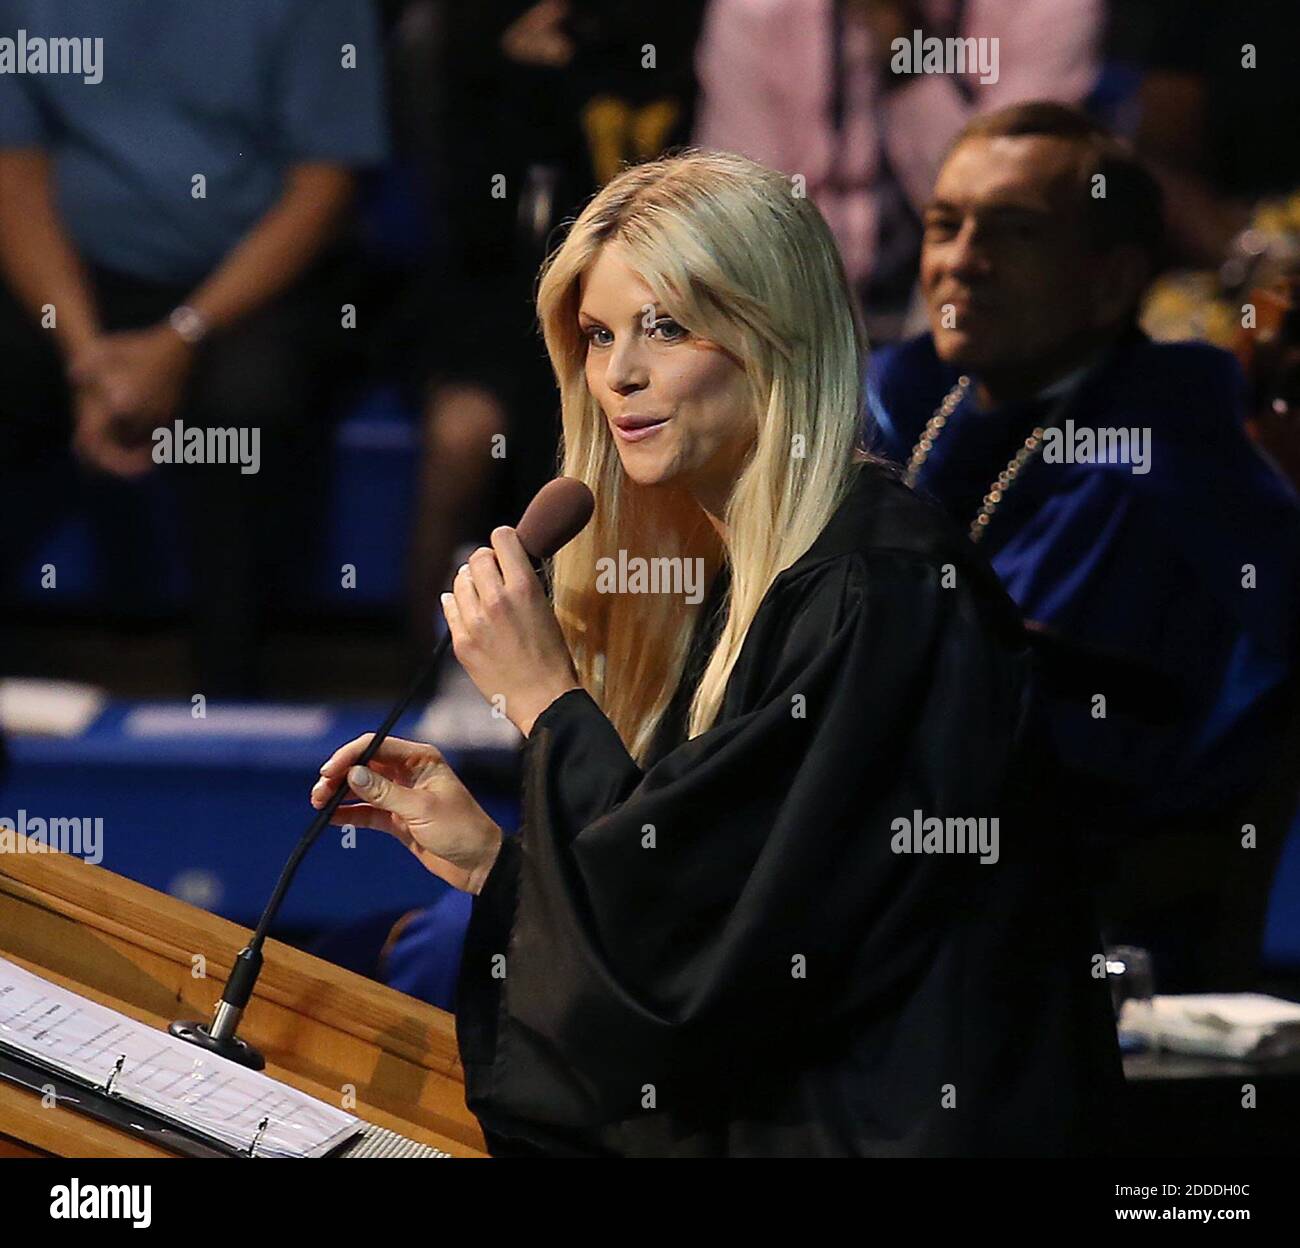 NO FILM, NO VIDEO, NO TV, NO DOCUMENTARY - Elin Nordegren speaks during commencement ceremonies at Rollins College in Winter Park, FL, USA on May 10, 2014. Nordegren, the former wife of golfer Tiger Woods, was named the 'Outstanding Graduating Senior' for Rollins College. Photo by Stephen M. Dowell/Orlando Sentinel/MCT/ABACAPRESS.COM Stock Photo